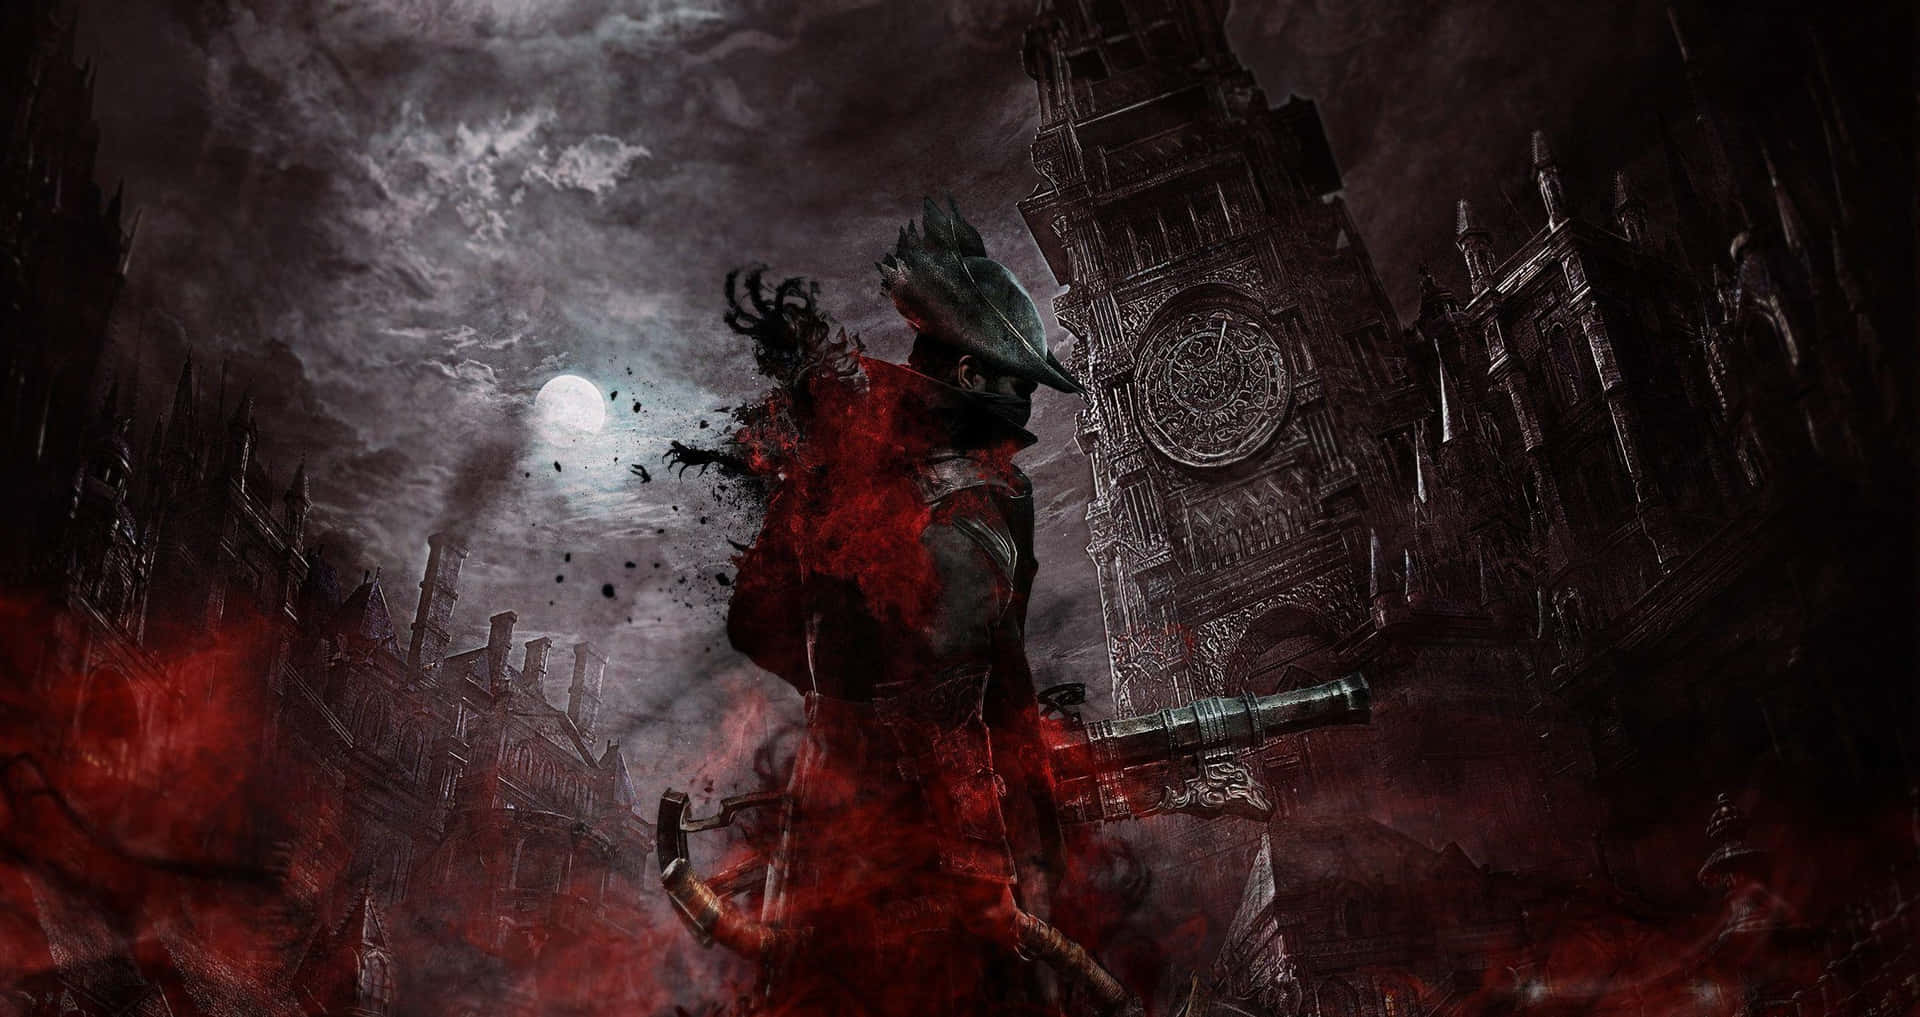 A haunting Bloodborne scene featuring the Hunter amidst a grim, foreboding landscape